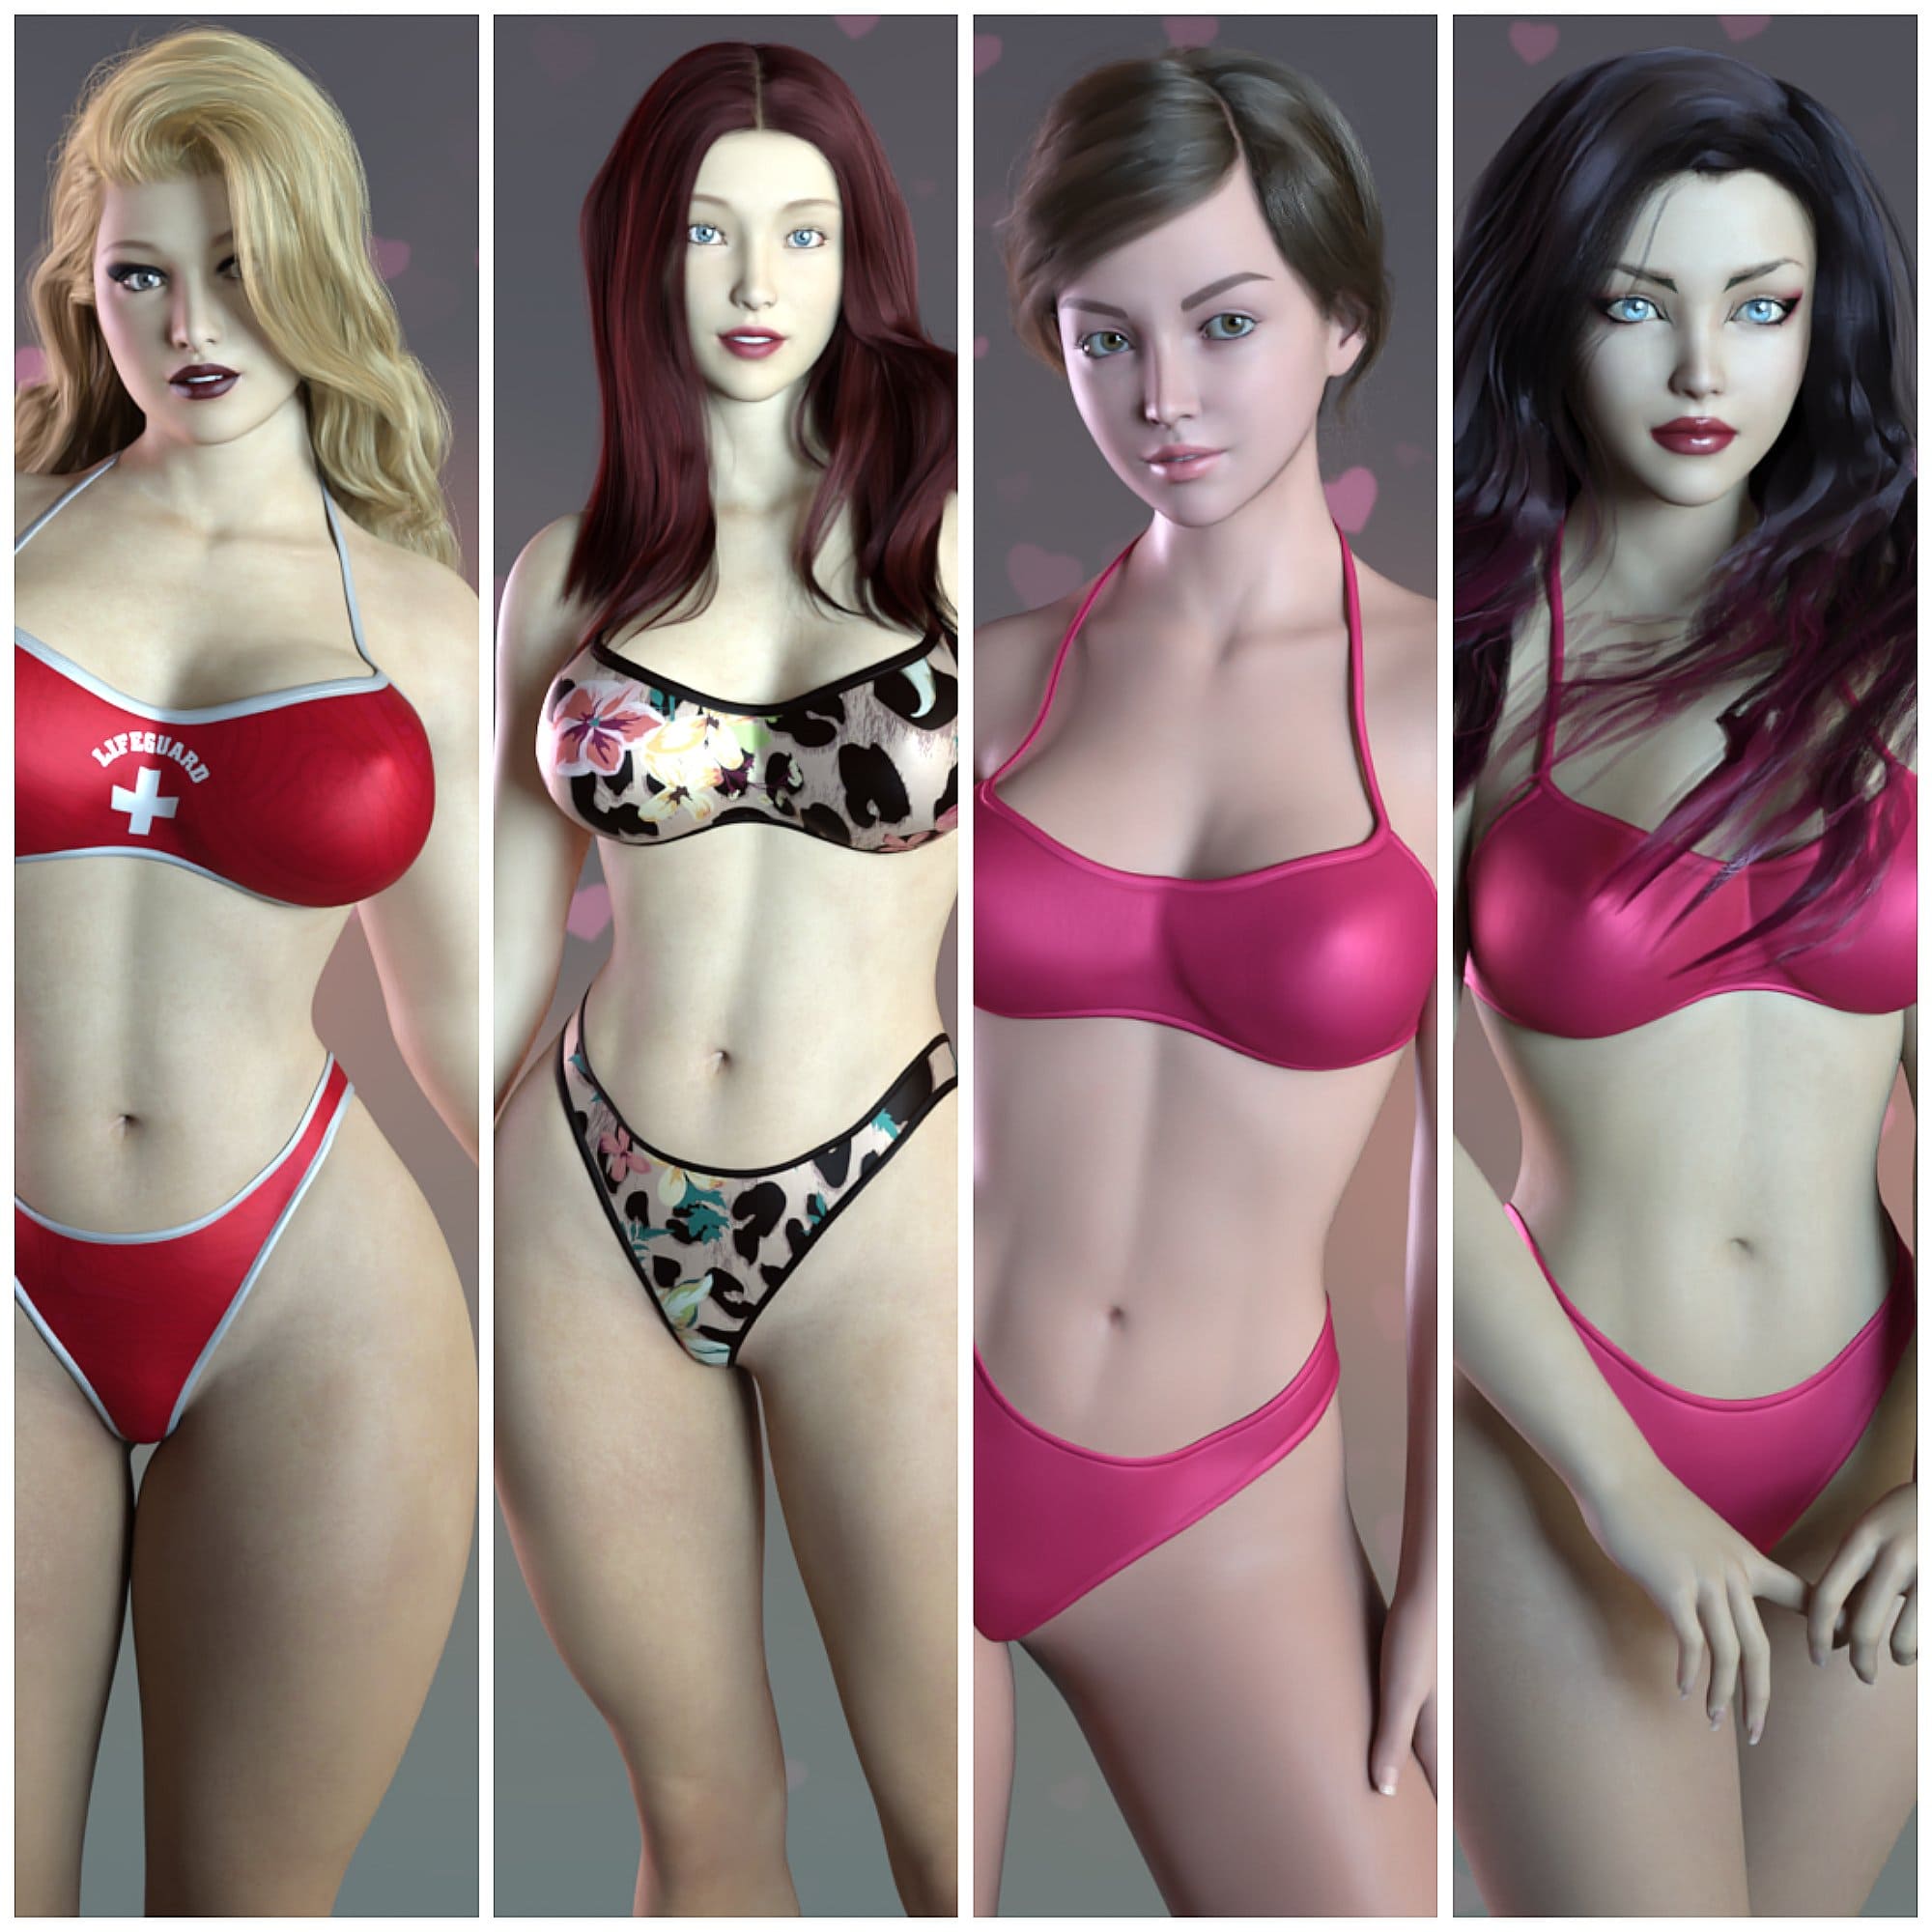 4 Curvy Body Character Morphs For Genesis 8 and 8.1F_DAZ3D下载站